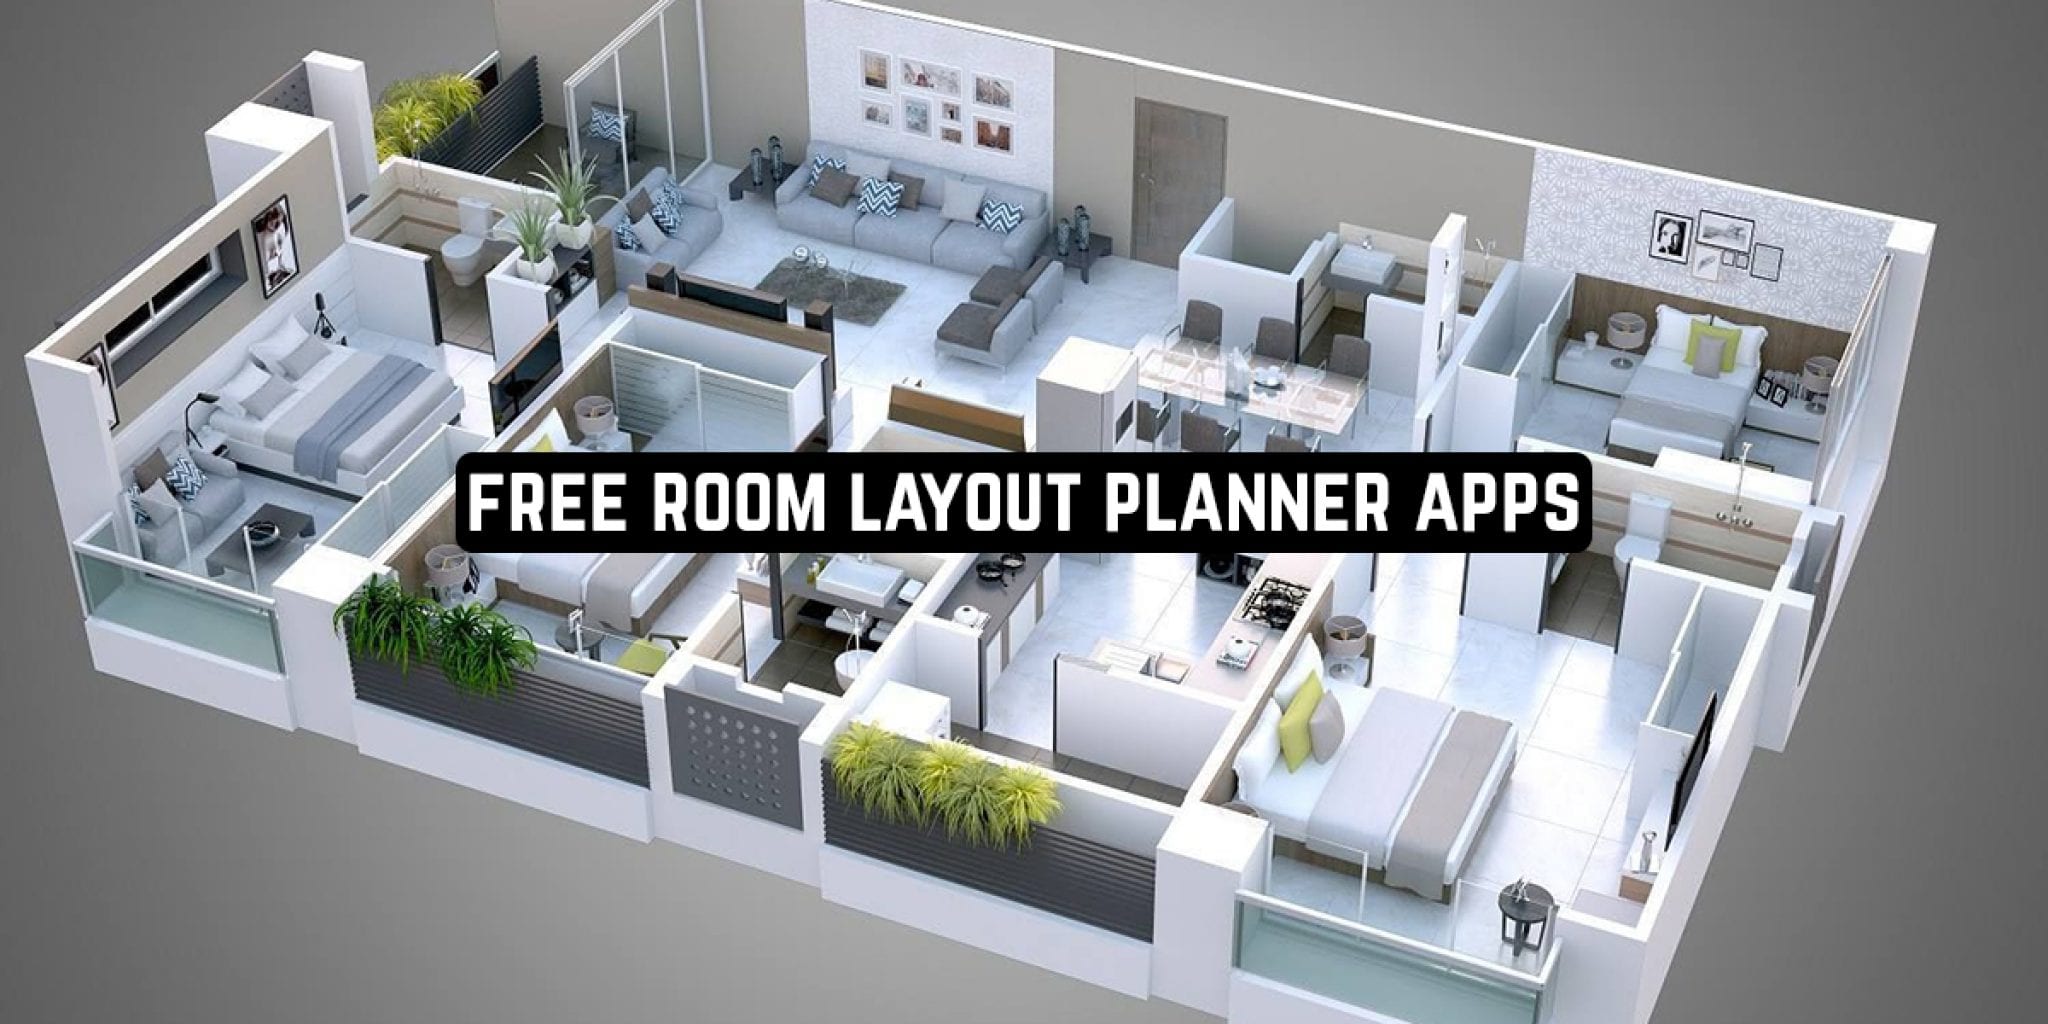 11 Free Room Layout Planner Apps for Android & iOS | Free apps for